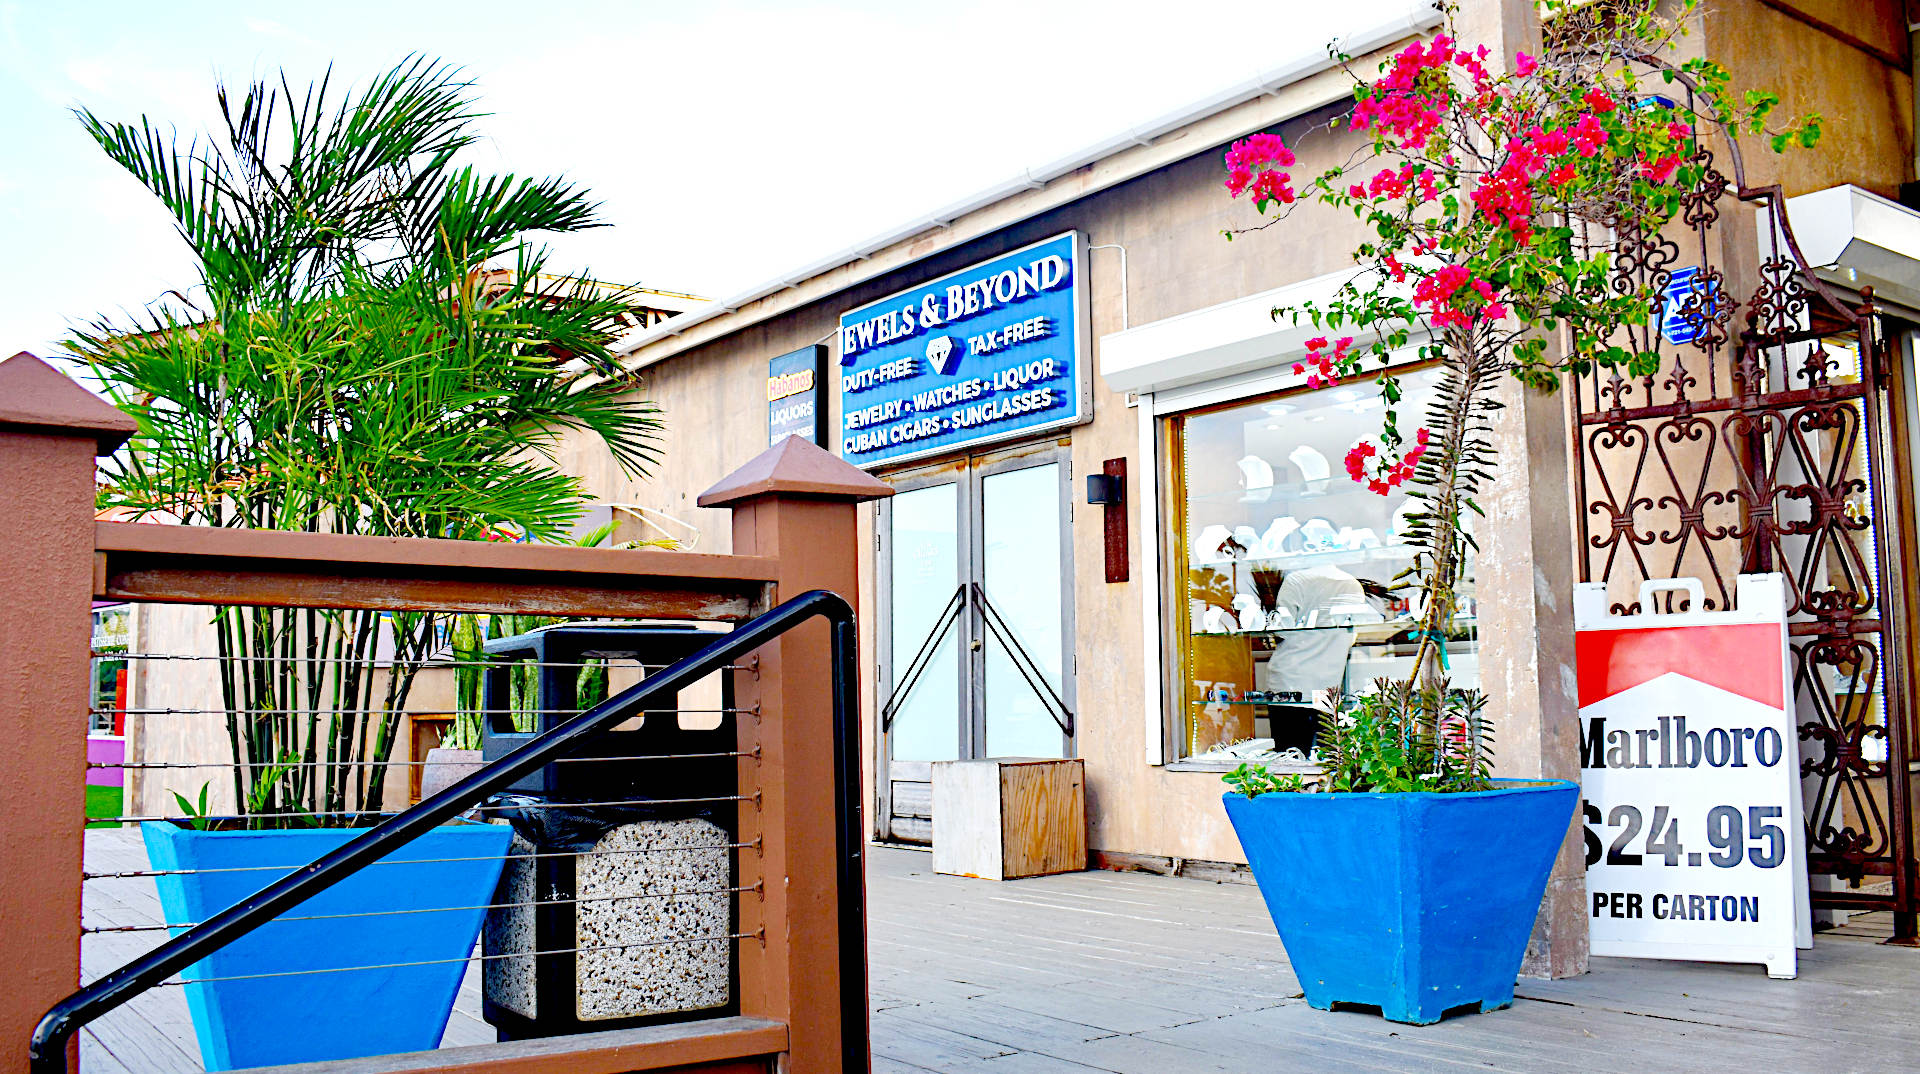 Jewels and Beyond Boutique at Sunset Beach Bar in St Maarten